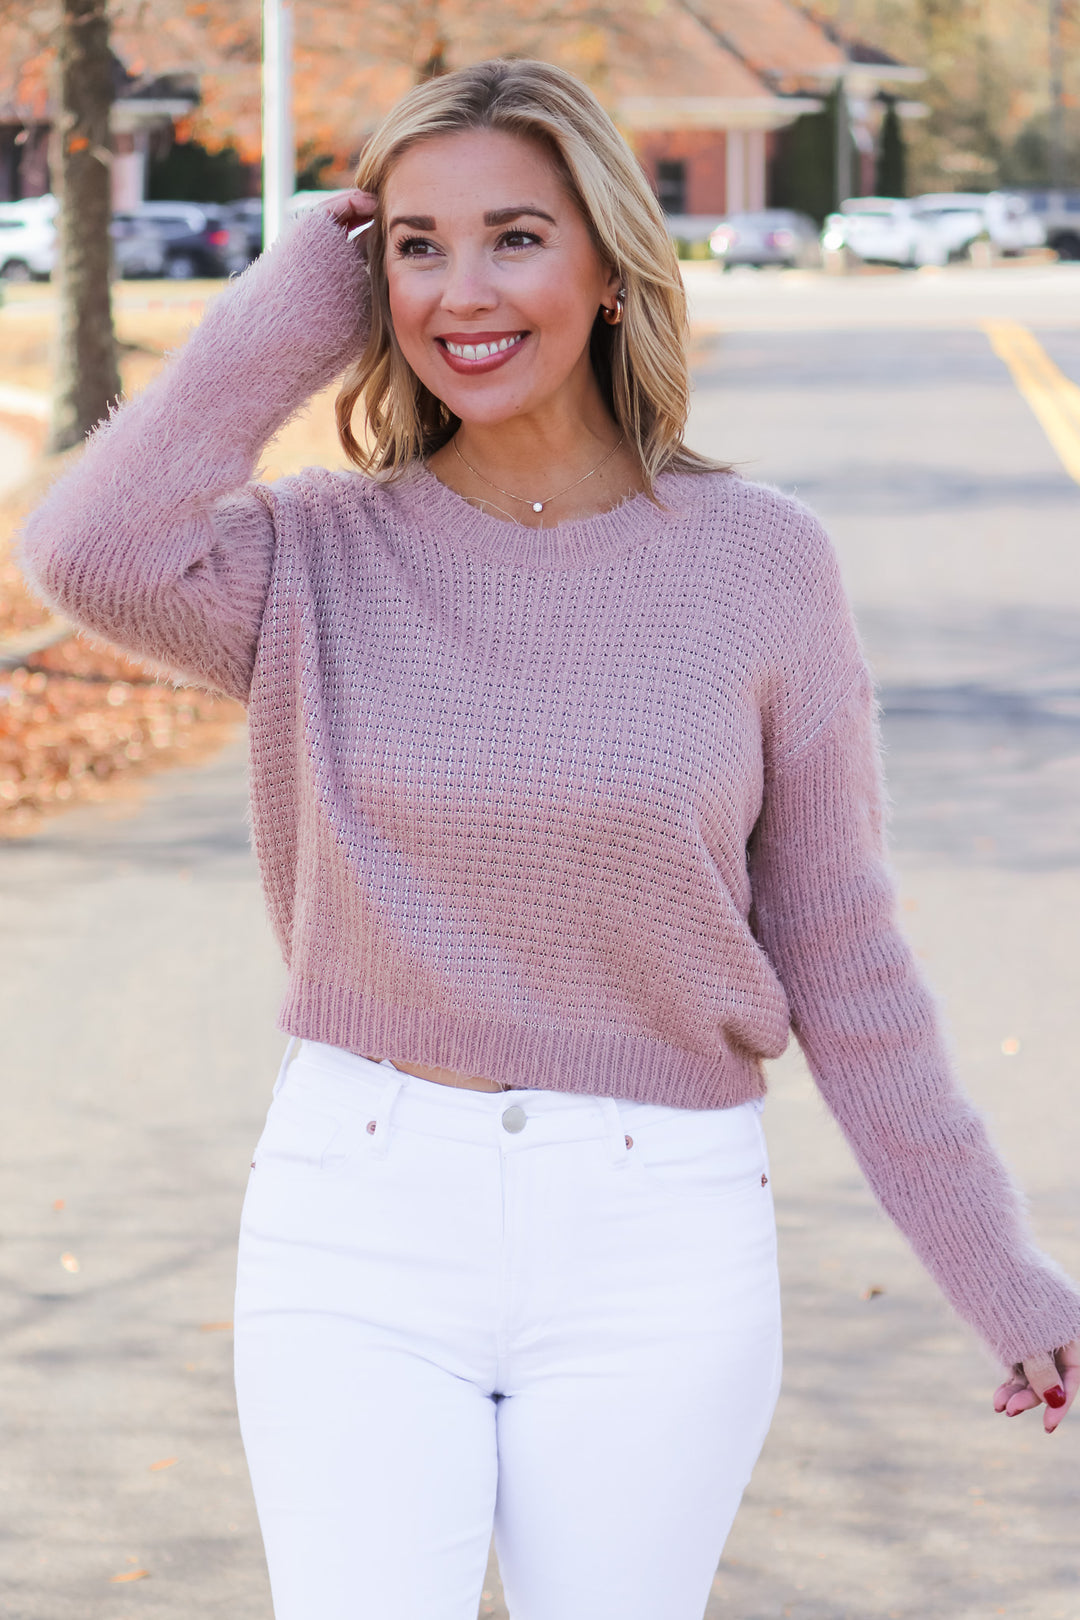 A blonde woman standing outside wearing a mauve colored long sleeve sweater and white jeans.